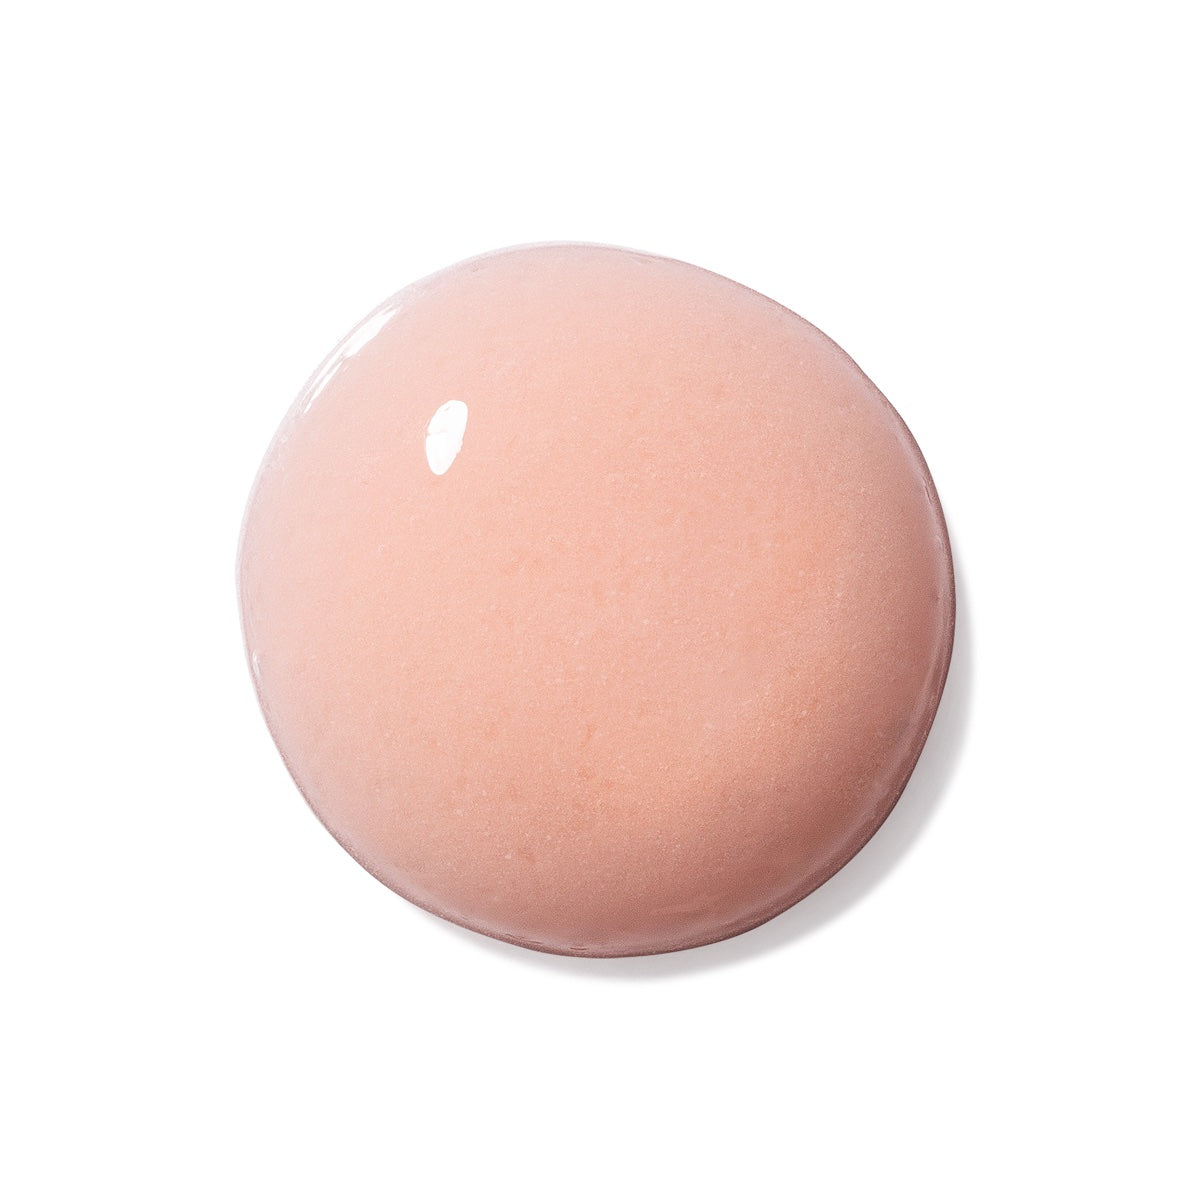 One large round pink droplet Pumice Acne Benzoyl Peroxide facial Cleanser Dermal Essentials Medical Grade Skincare